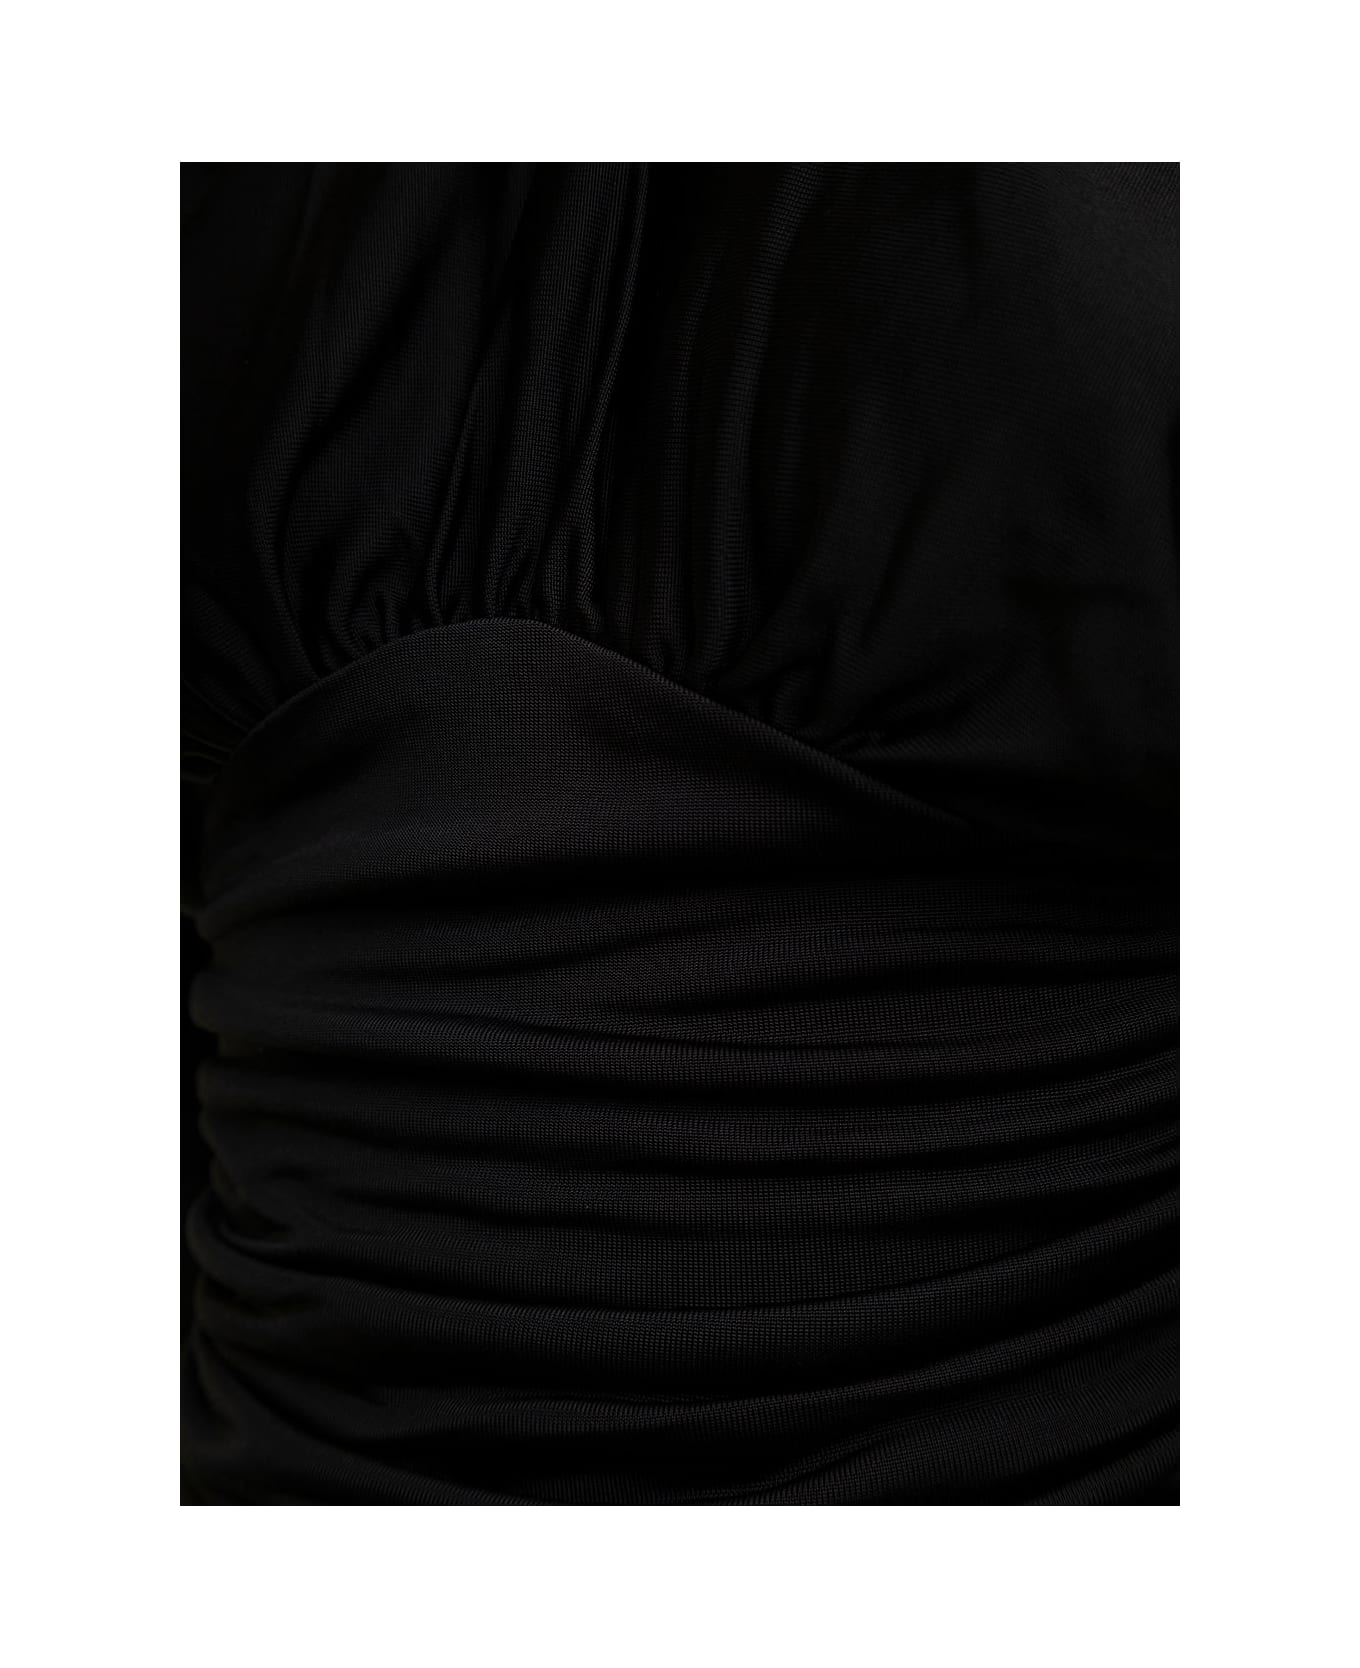 Saint Laurent Woman's Stretch Jersey Long-sleeved Top With Back Uncovered - Nero